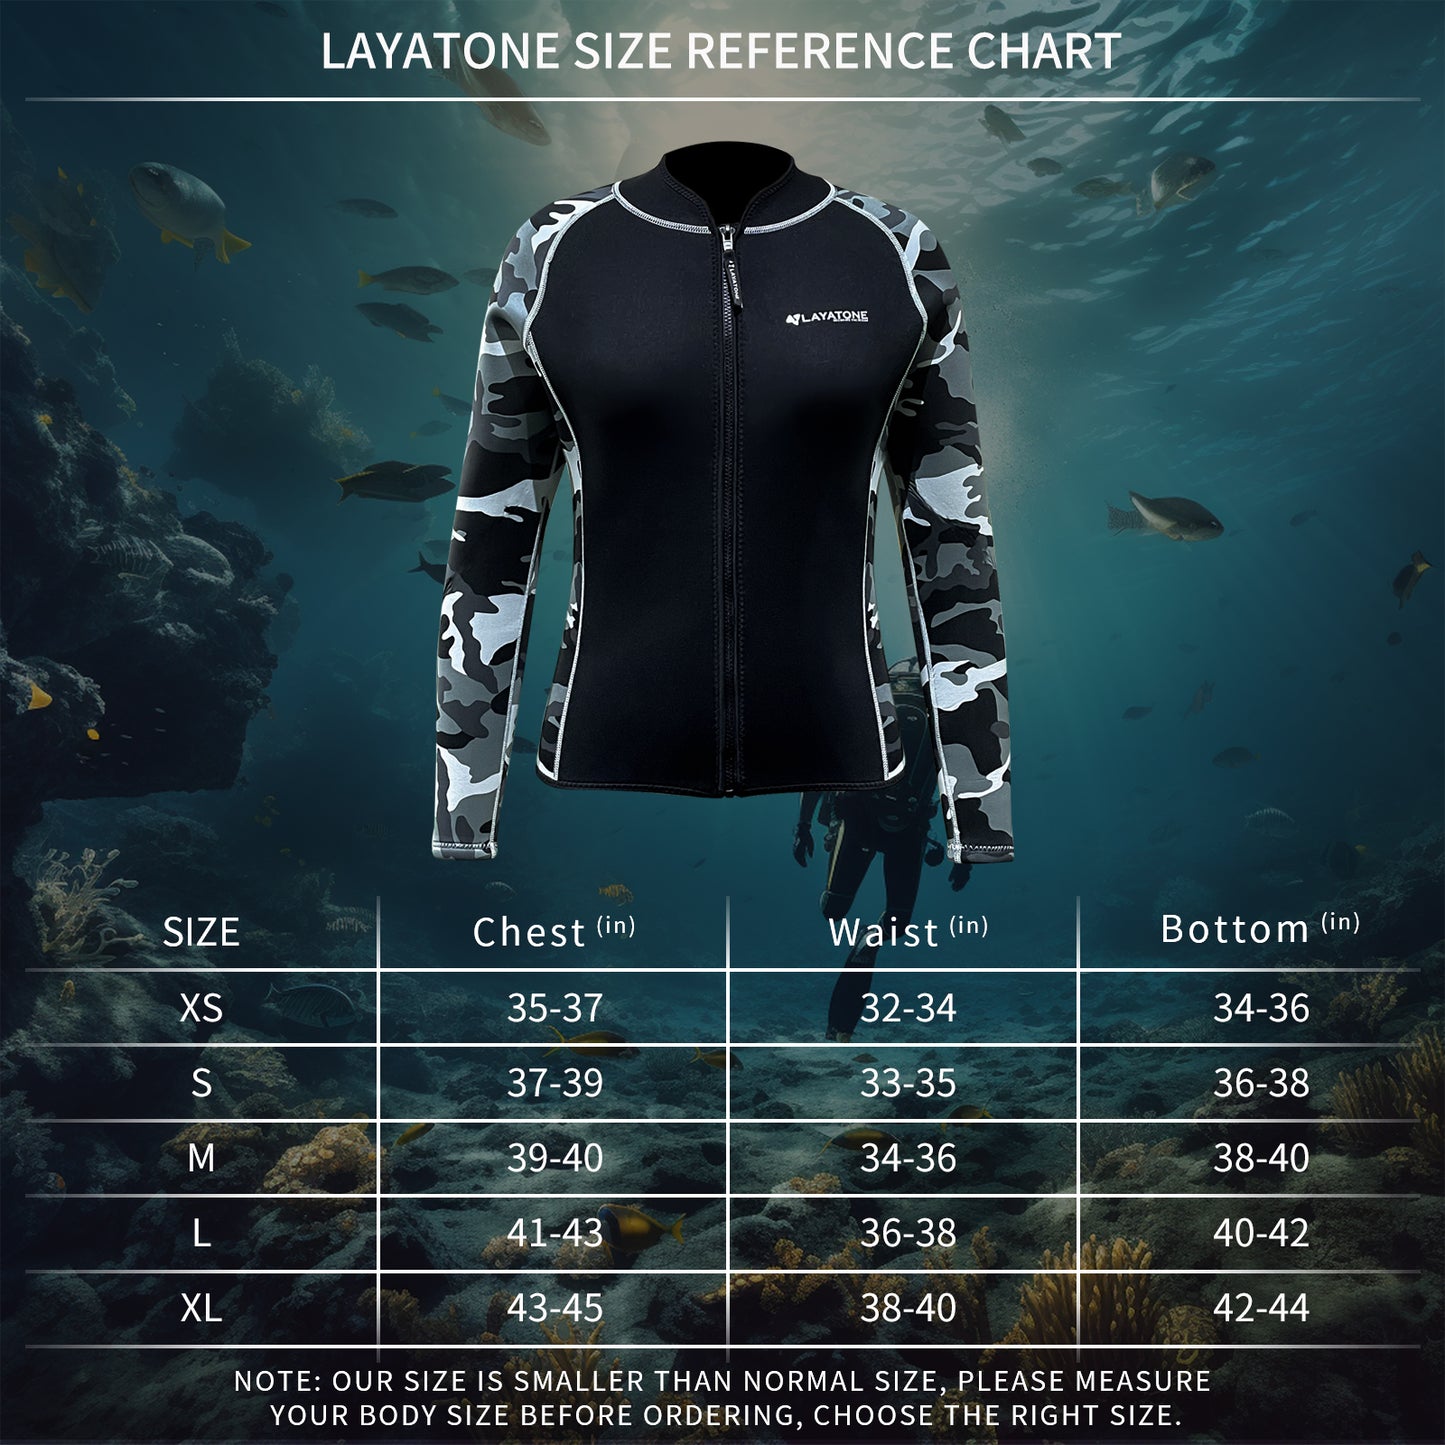 LAYATONE Mens Wetsuit Top Jacket 2mm or 3mm - Neoprene Long Sleeve for Warmth &amp; Comfort- Surfing, Snorkeling, All Watersports - w/Extended Back Flap and Durable YKK Locking Front Zipper